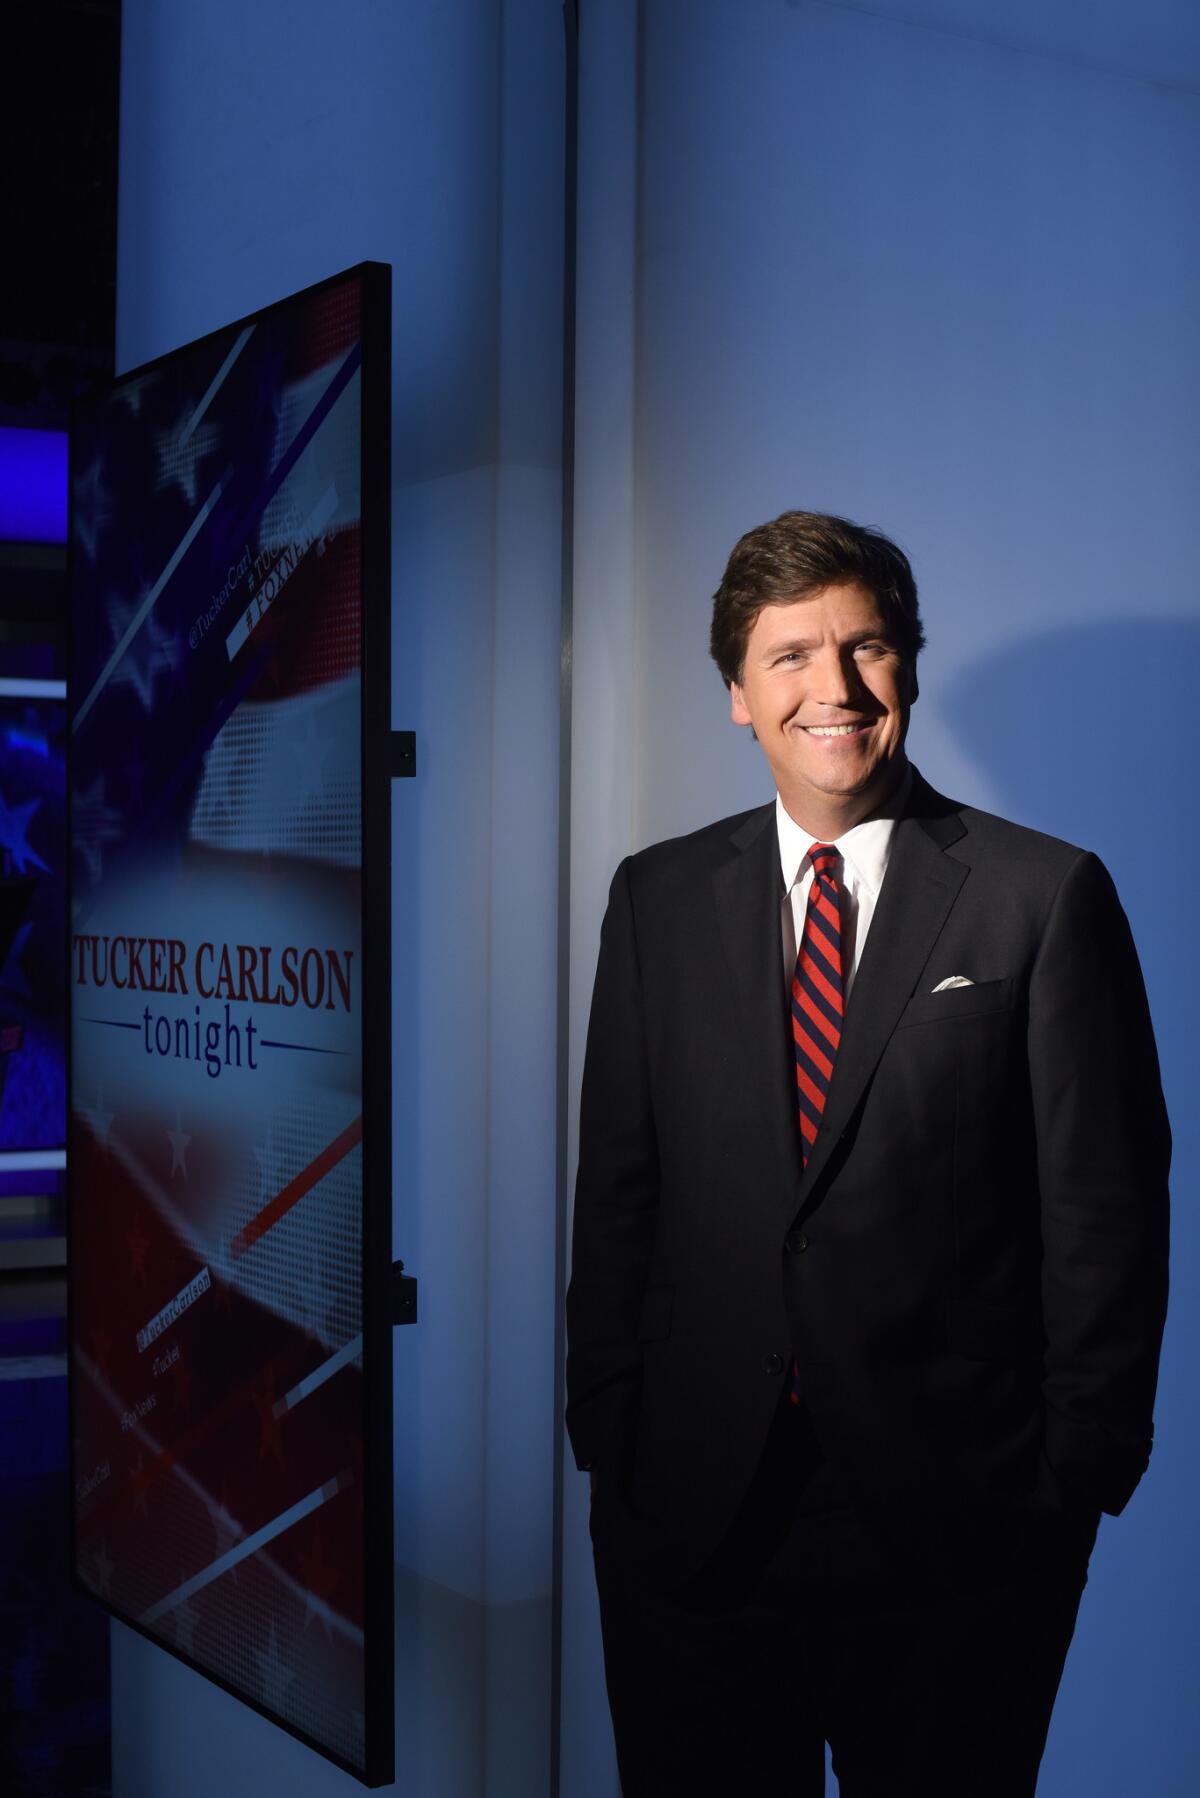 Tucker Carlson is less of a Trump defender than a true believer in the issues that energize the president’s supporters.